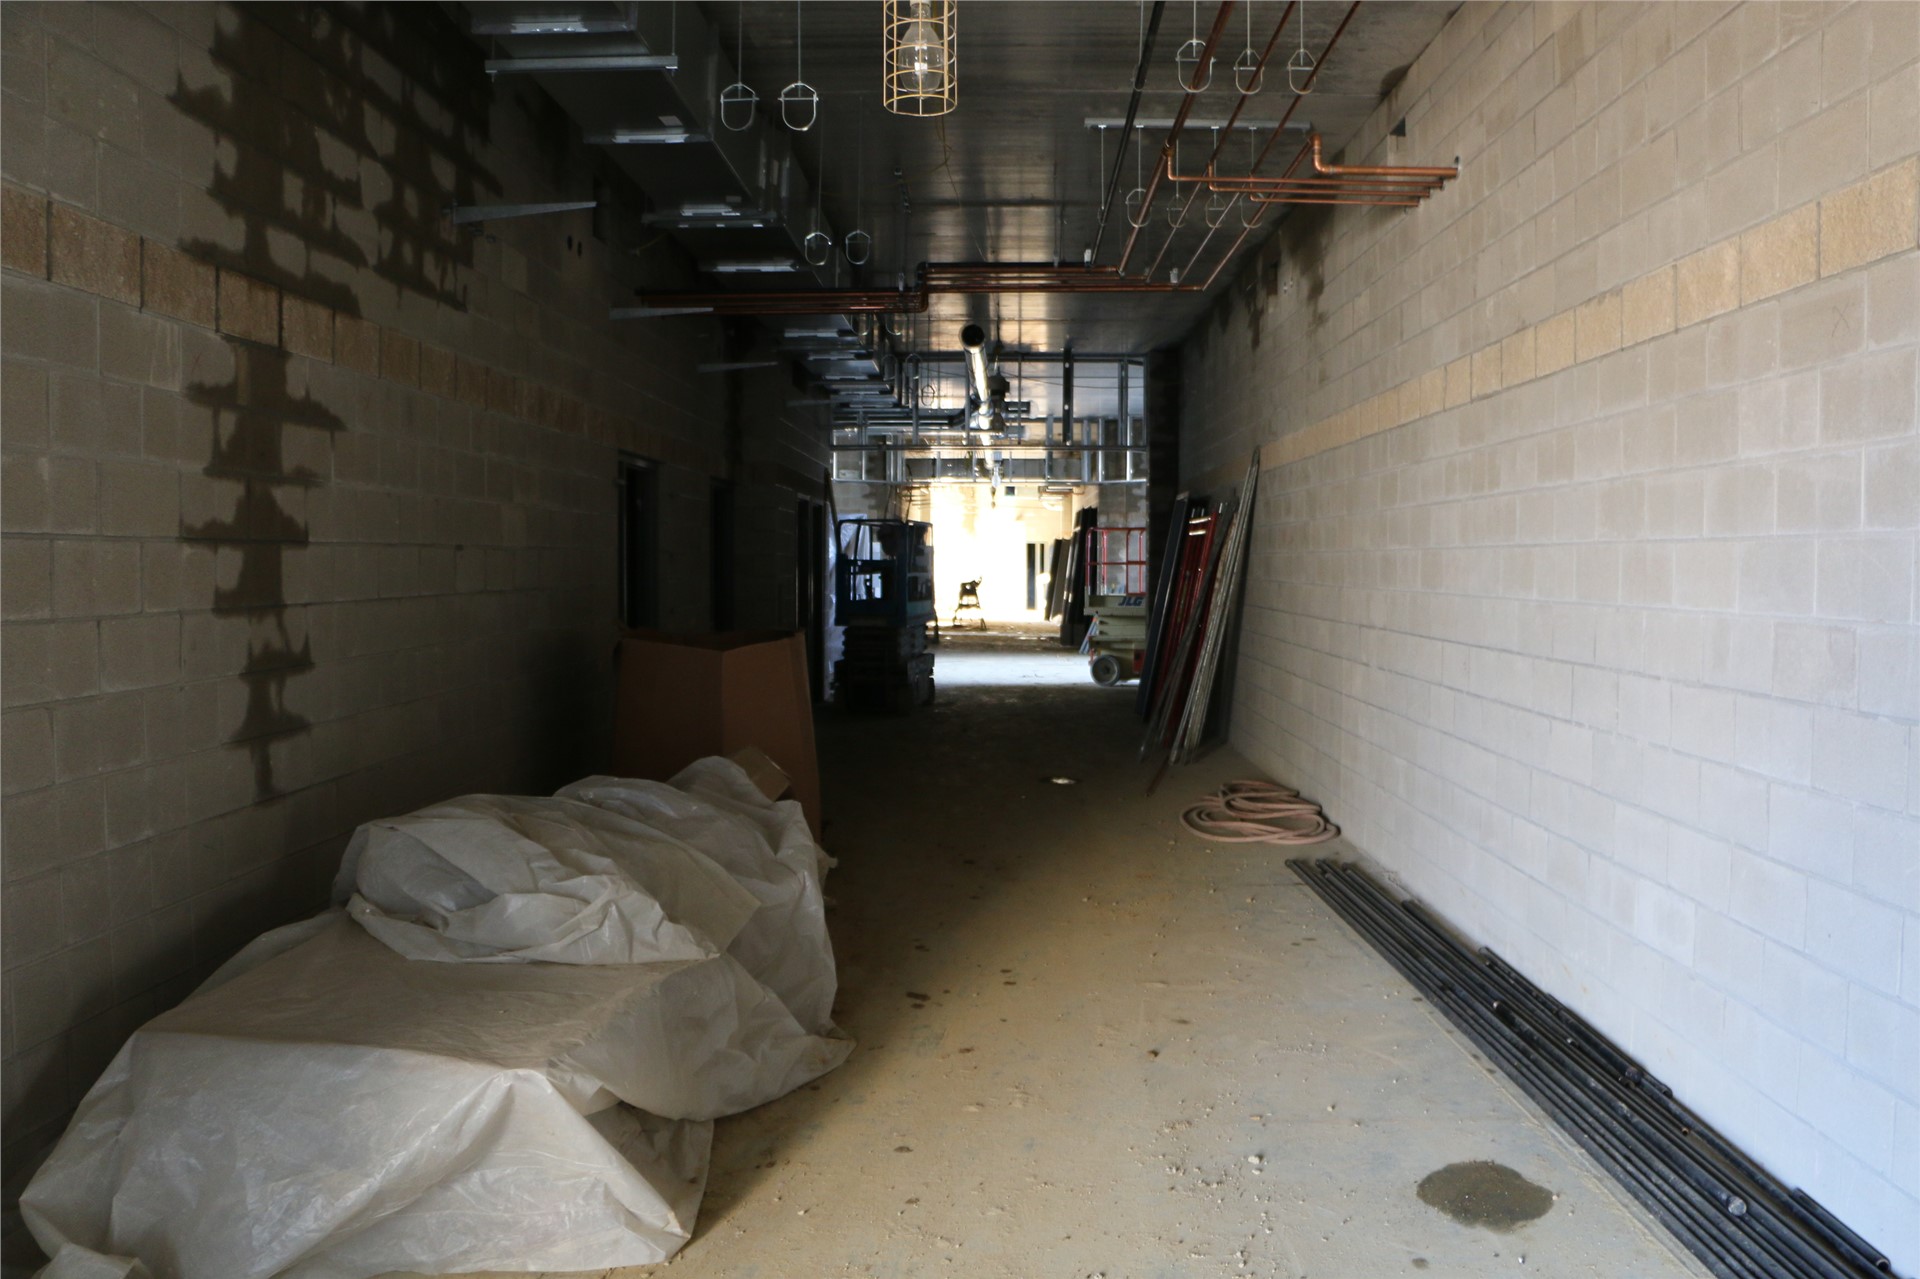 The first floor going towards the west academic wing from the east academic wing